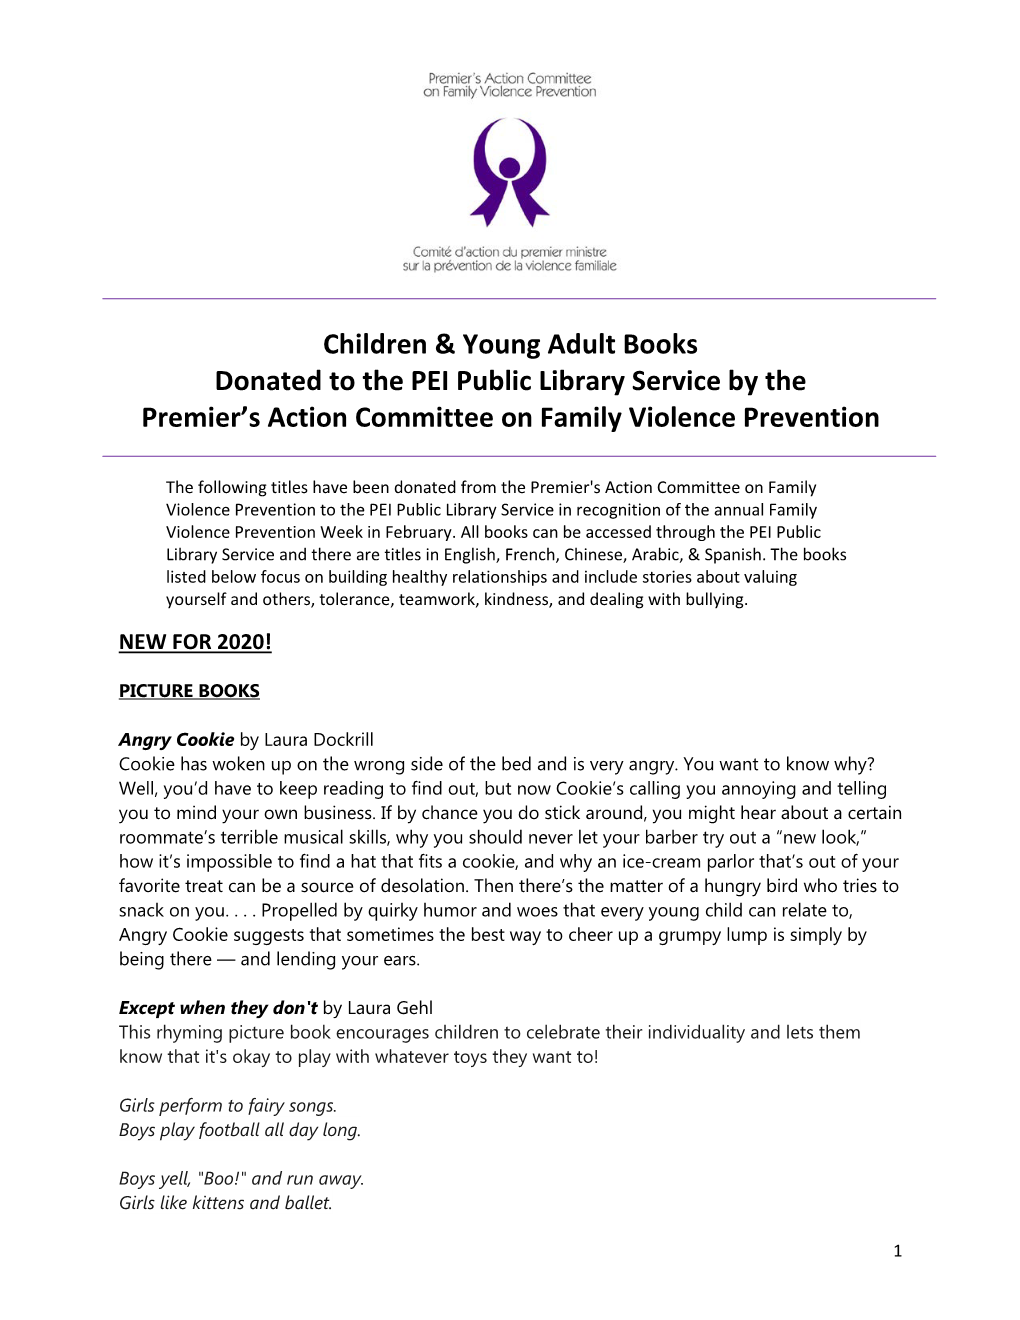 Books for Children and Young Adult from the PEI Public Library Service